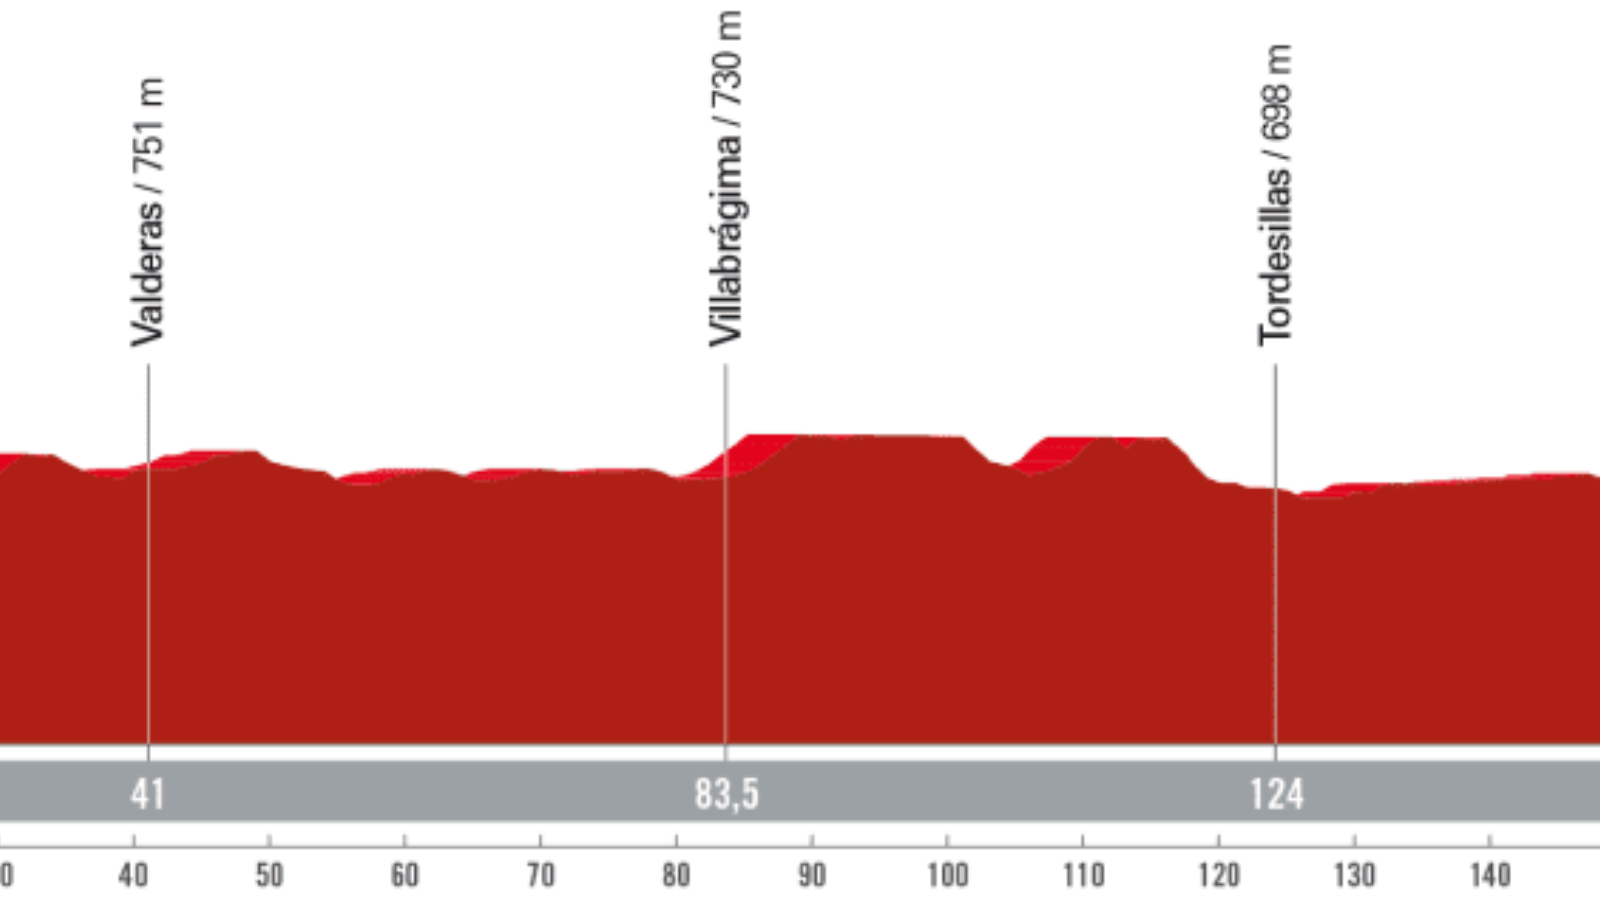 Program of Stage 19 at Vuelta a Espana 2023